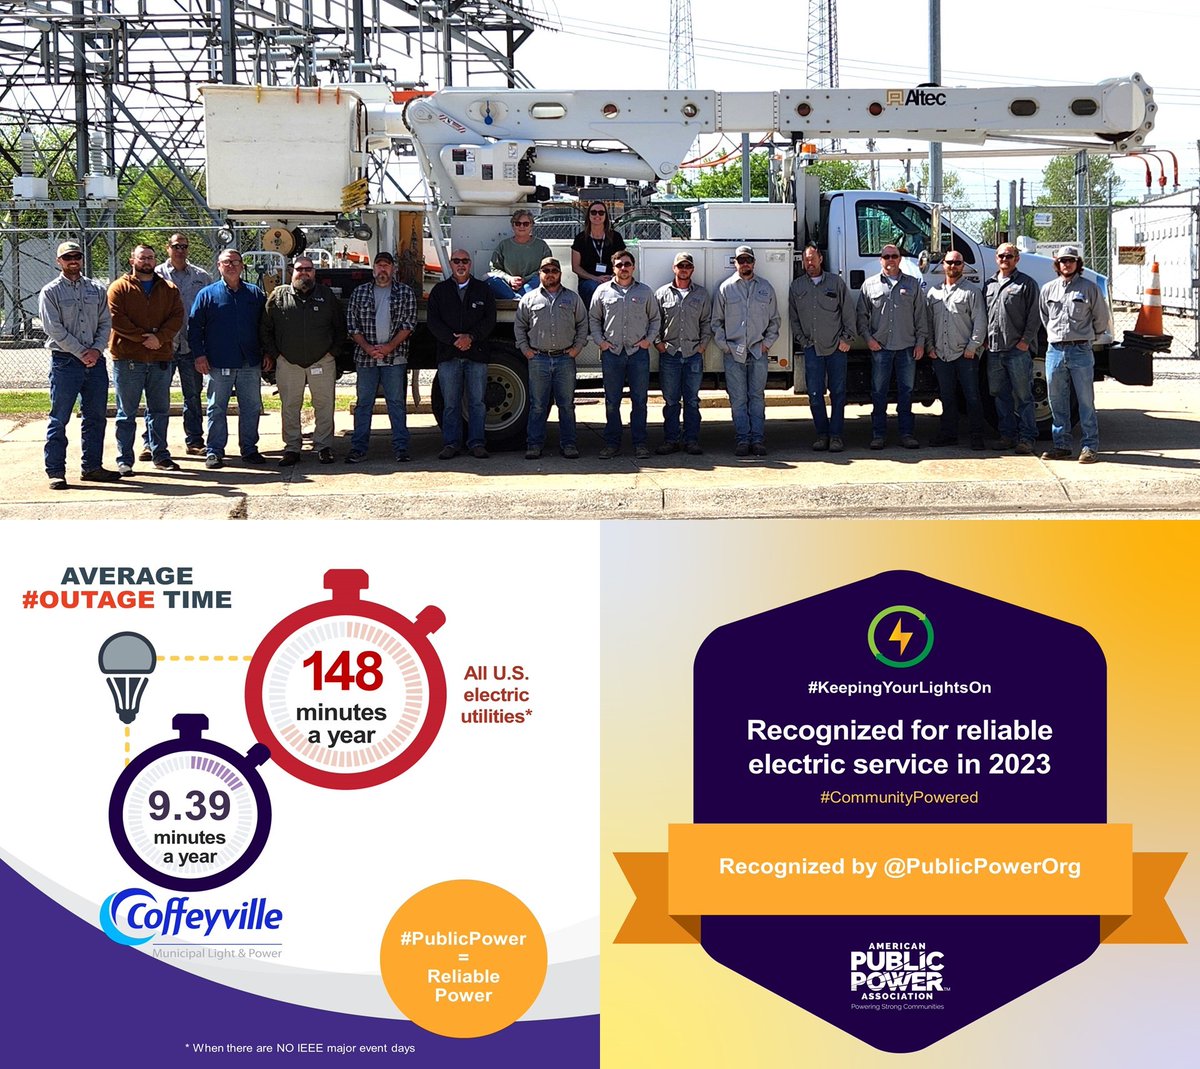 🏆CMLP has again received recognition from APPA for reliability, boasting an average outage duration of only 9.39 minutes a year versus the average of 148 minutes. We are fortunate to have hard working individuals on board at CMLP who take charge and keep our #communitypowered!🔌